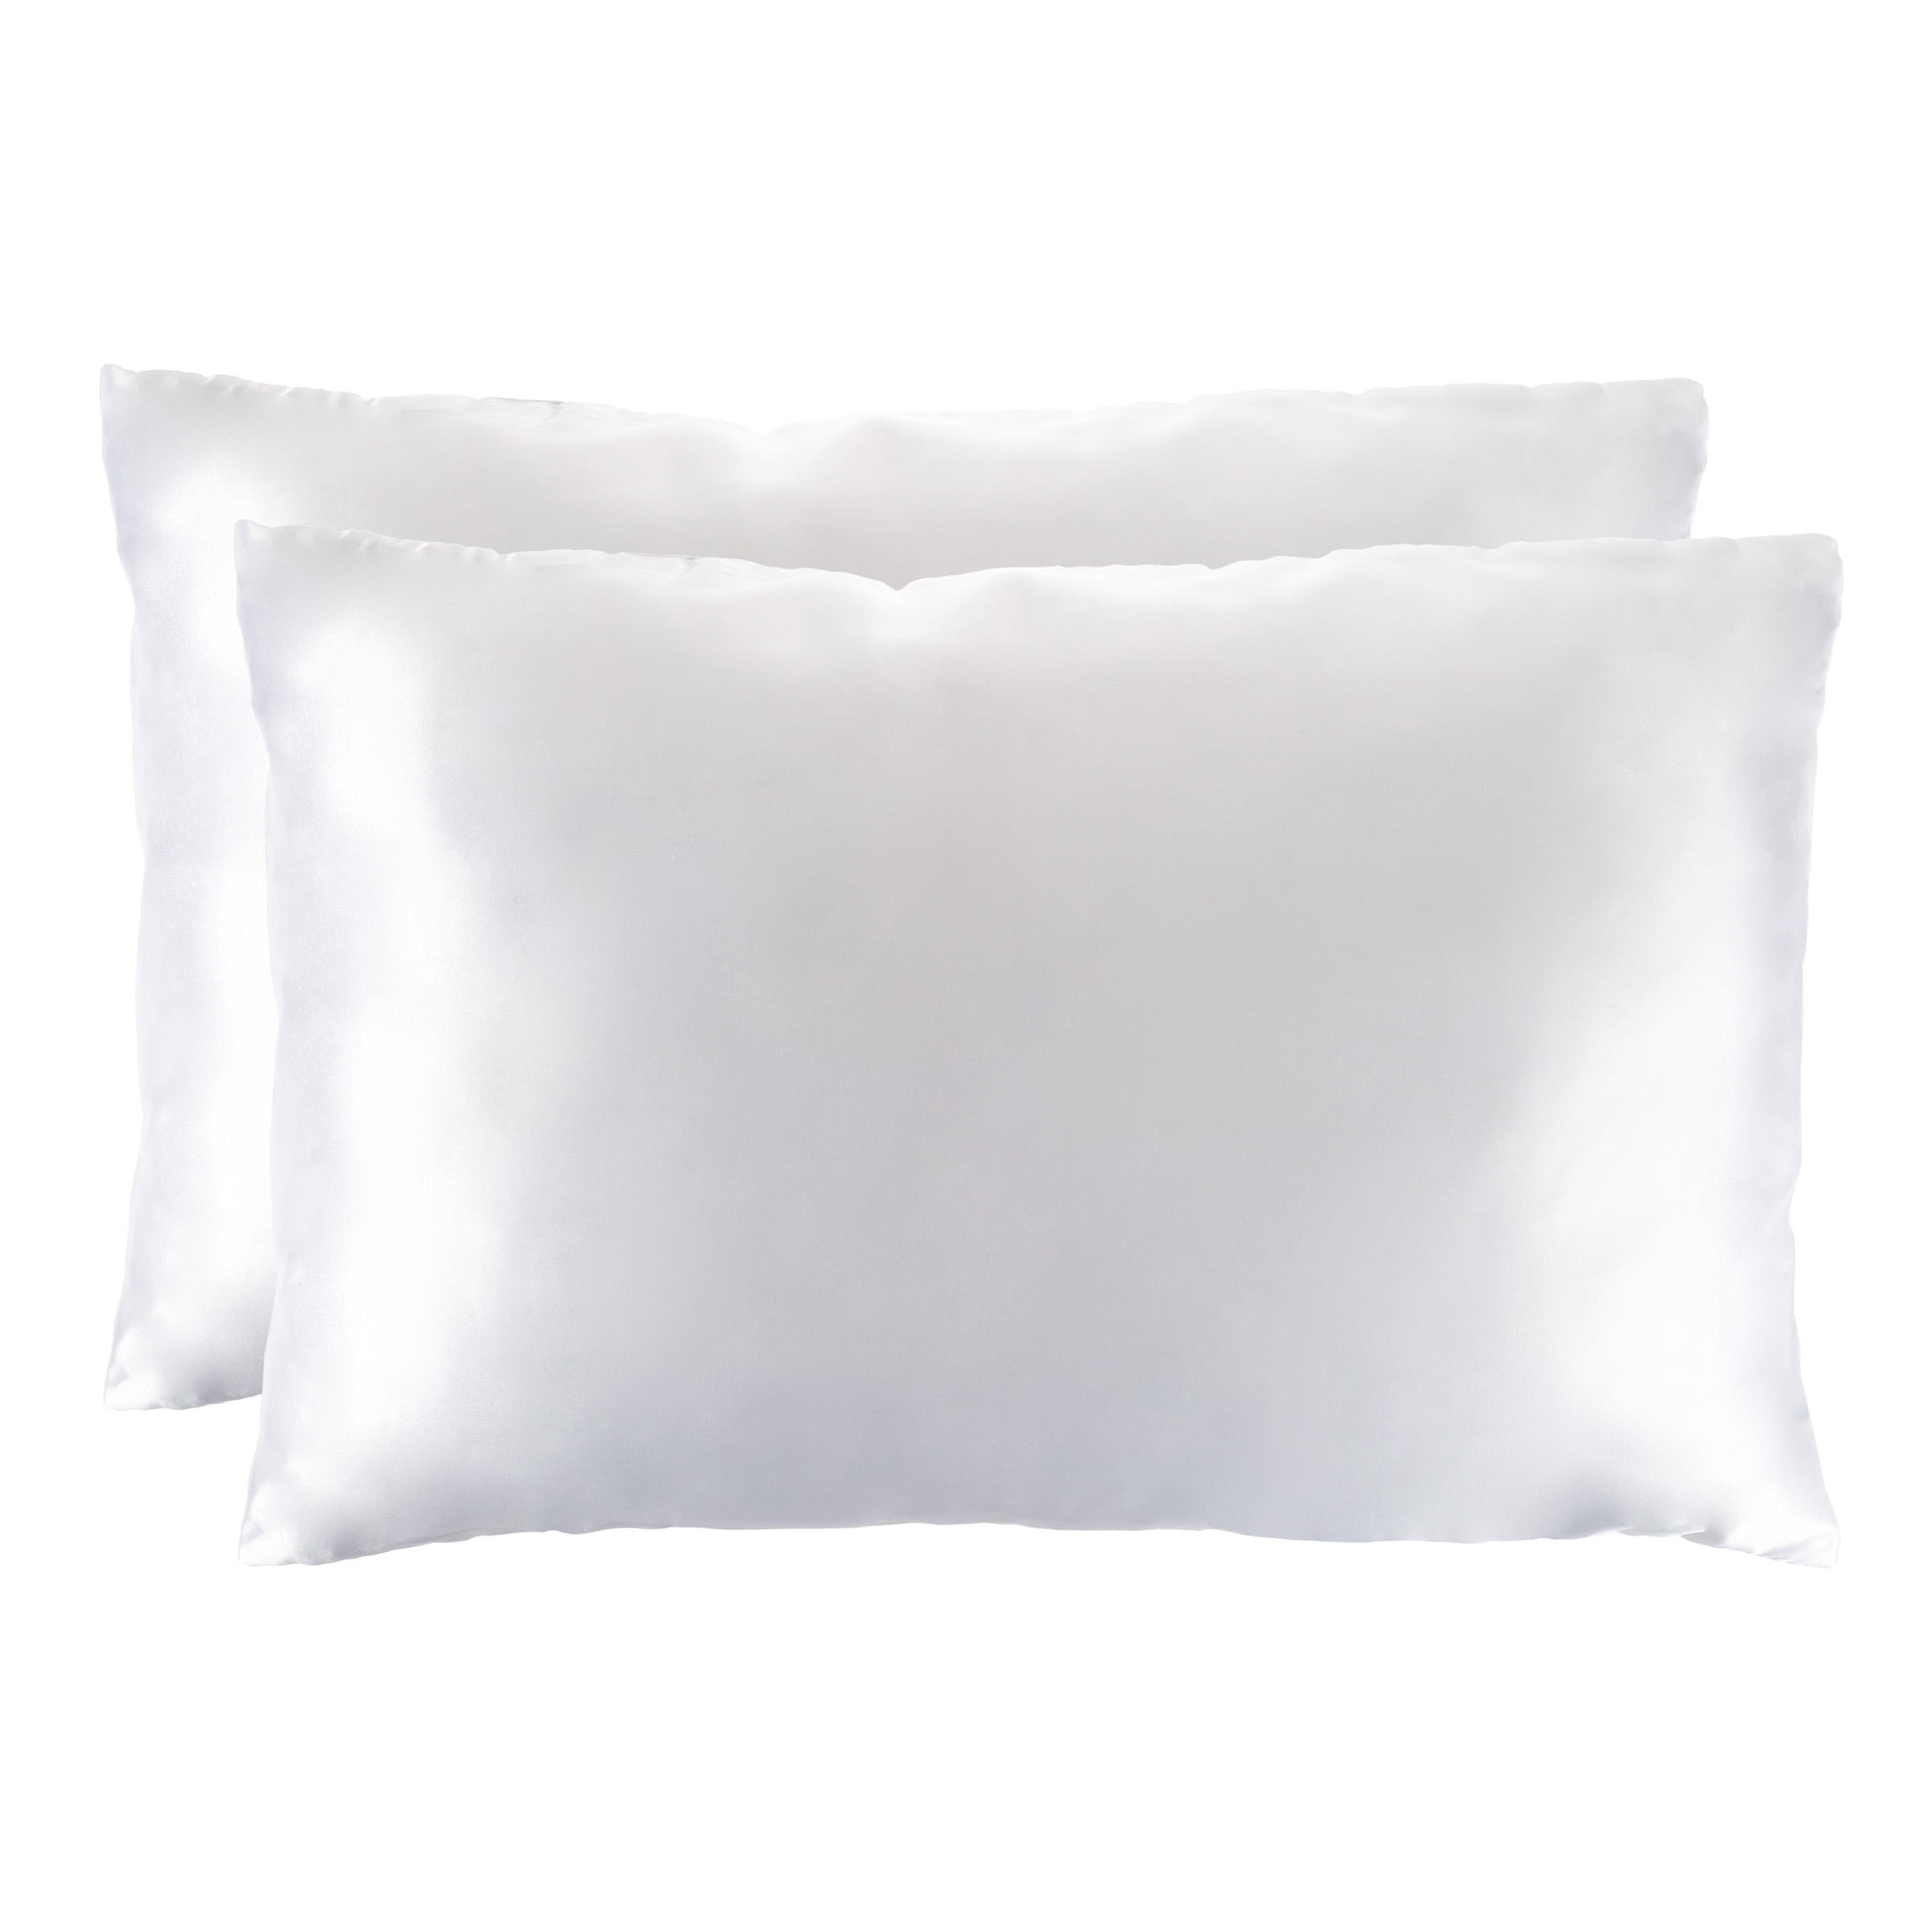 Set Of 2 Soft And Silky Satin Microfiber Pillowcases Hair & Skin Pillow Covers Hidden Zippers - Silver-King